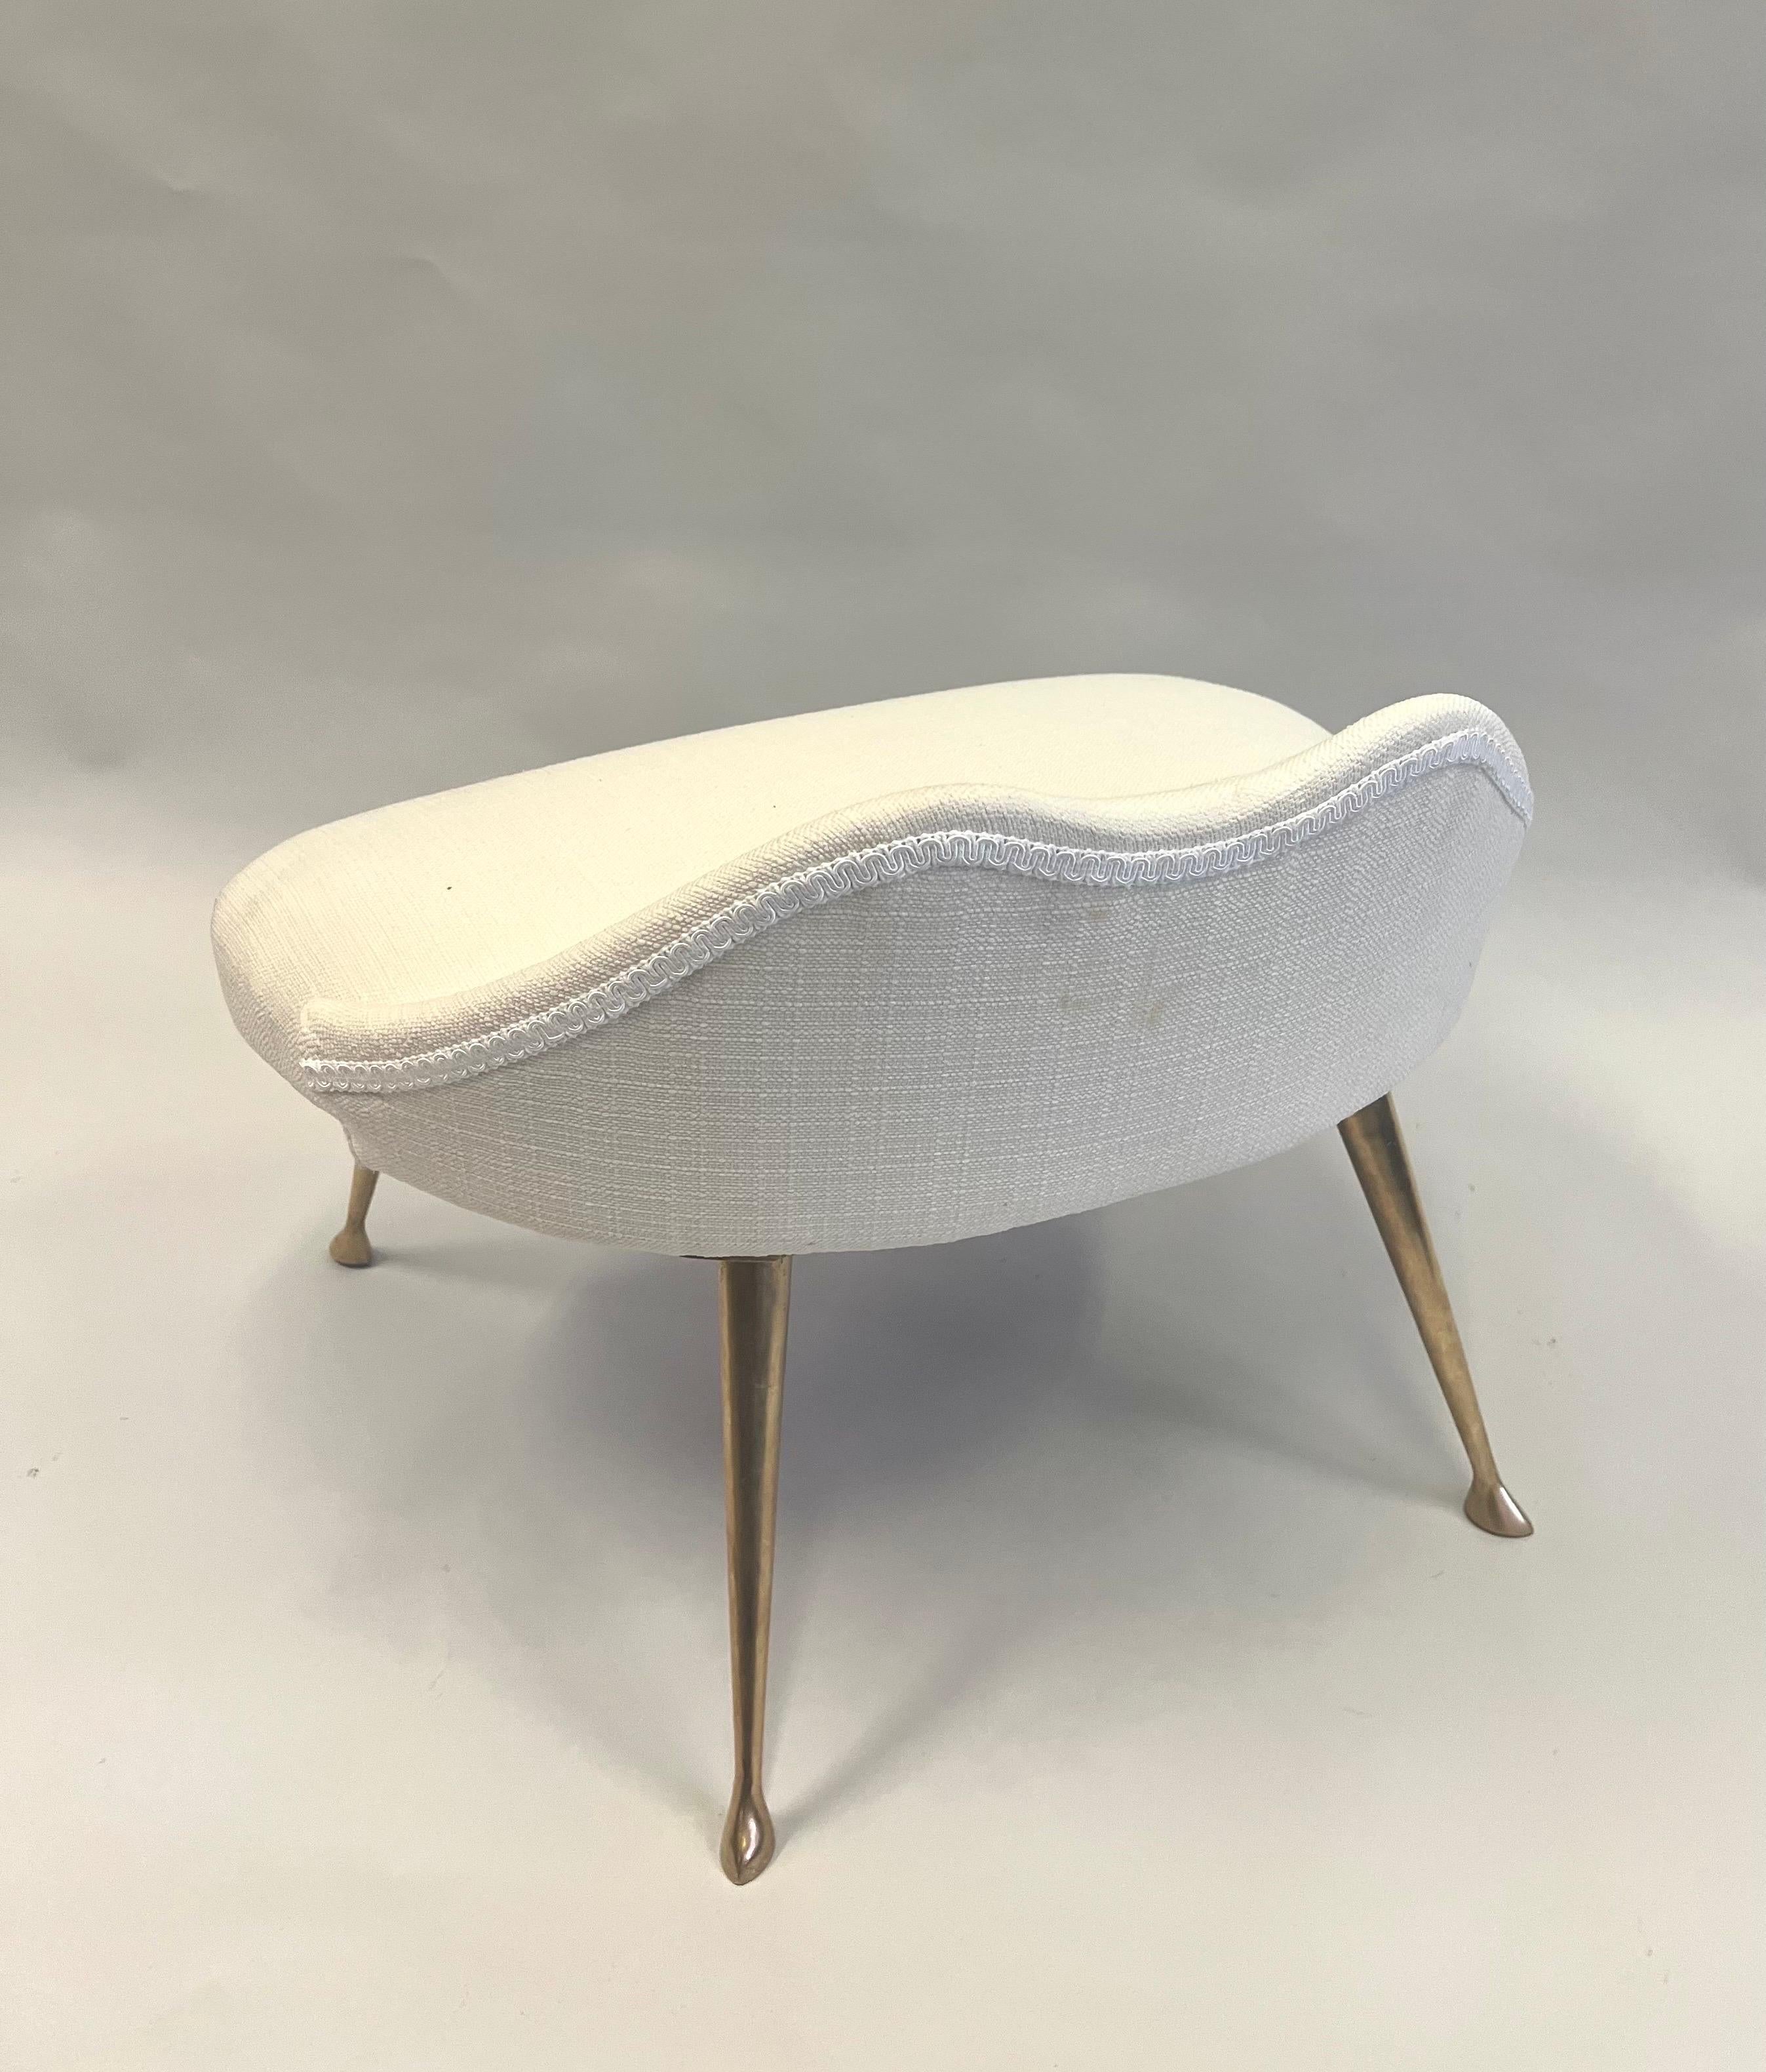 Italian Mid-CenturyModern Brass & Cotton Vanity Chair Attributed to Marco Zanuso For Sale 1